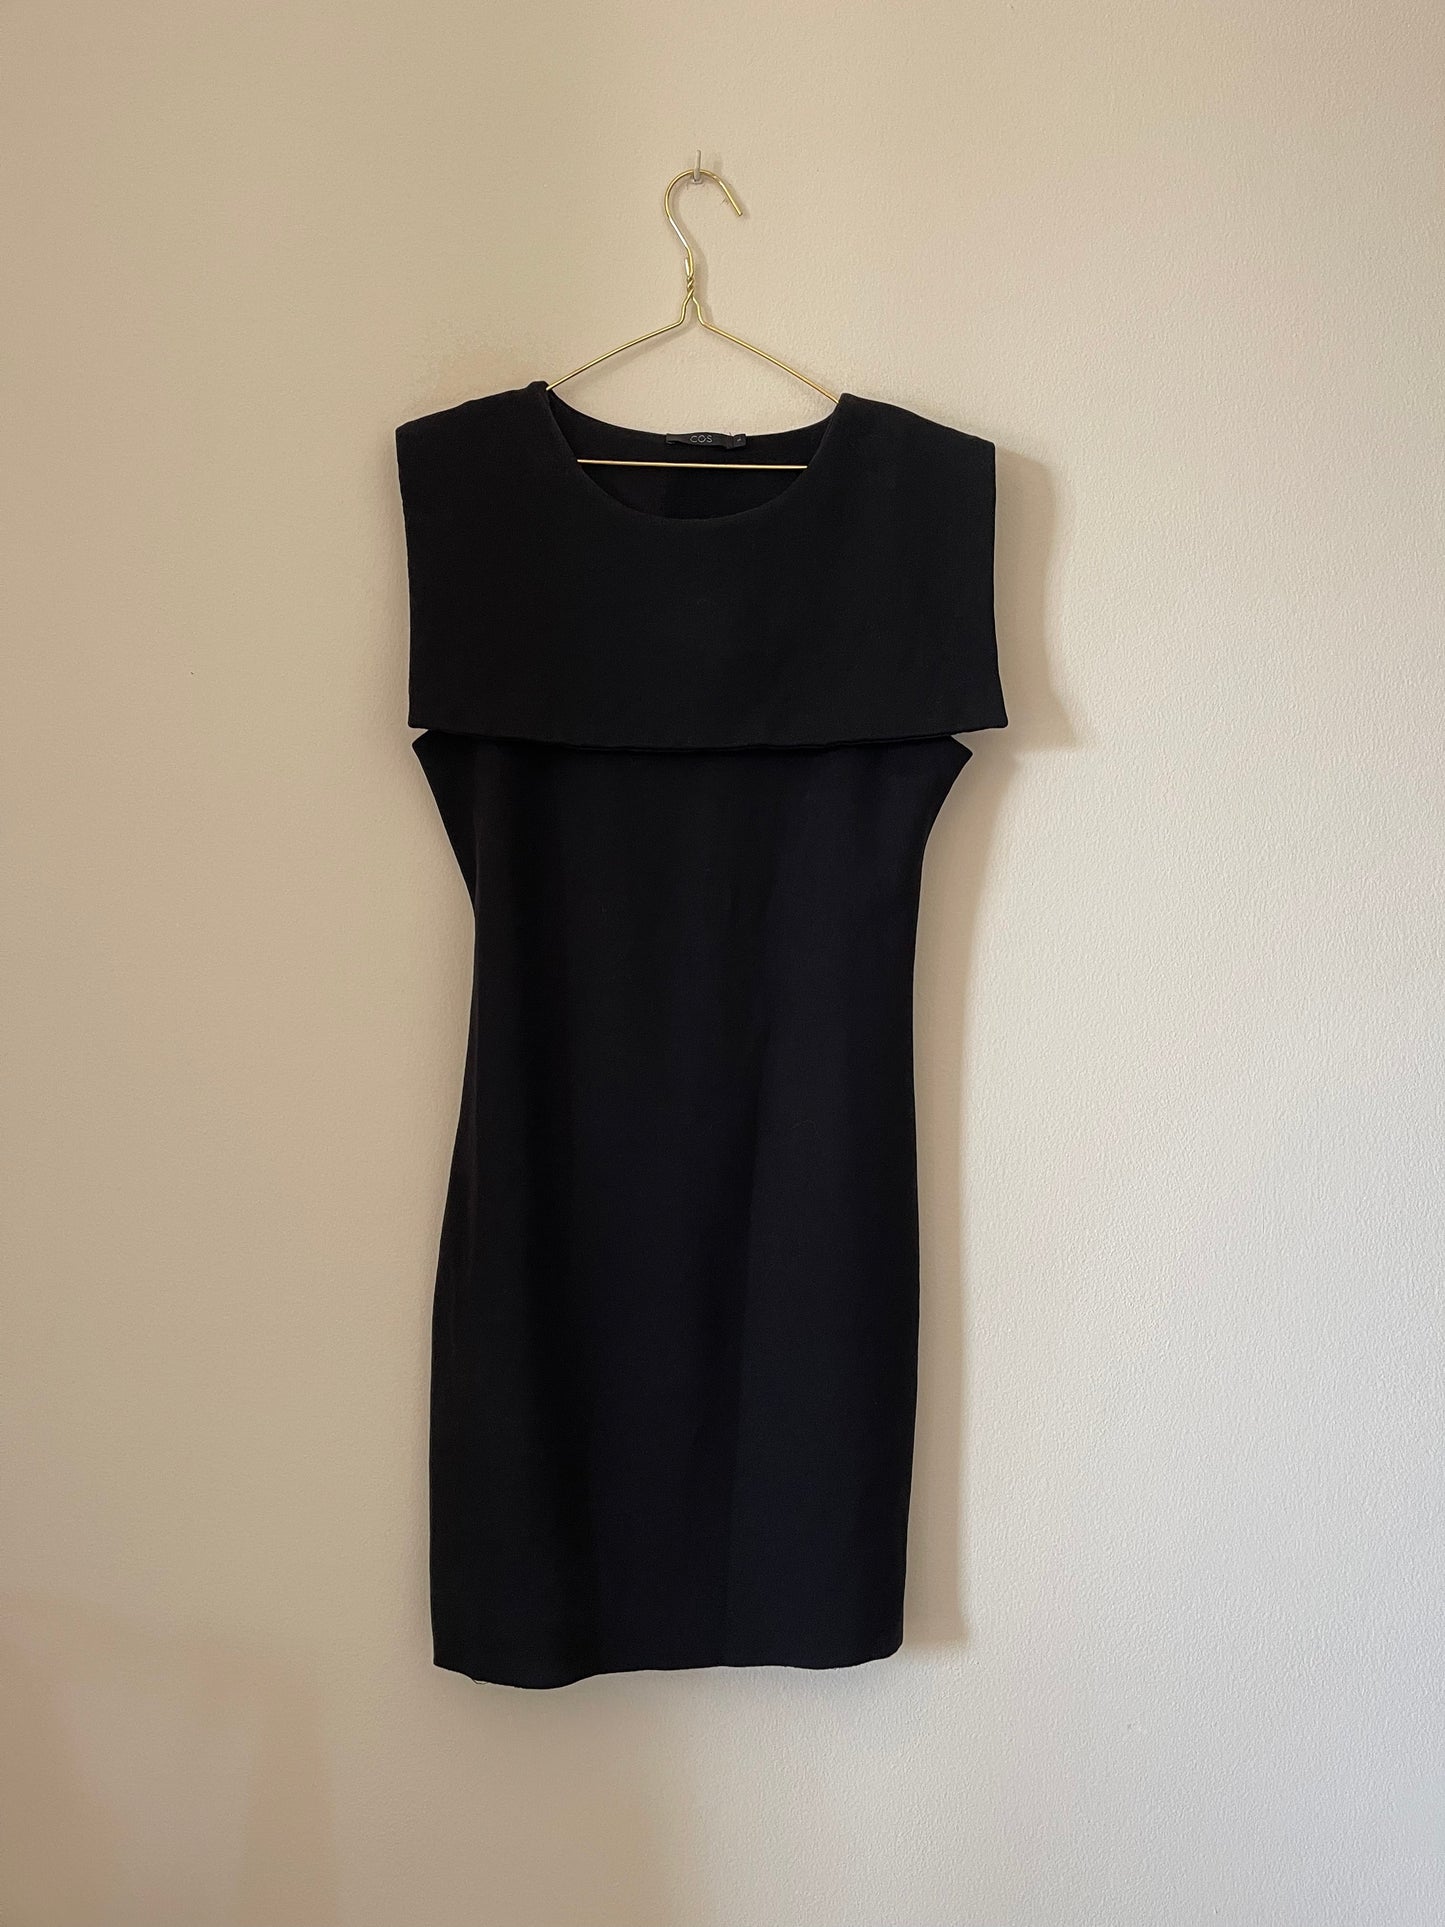 Gorgeous mini black dress from COS